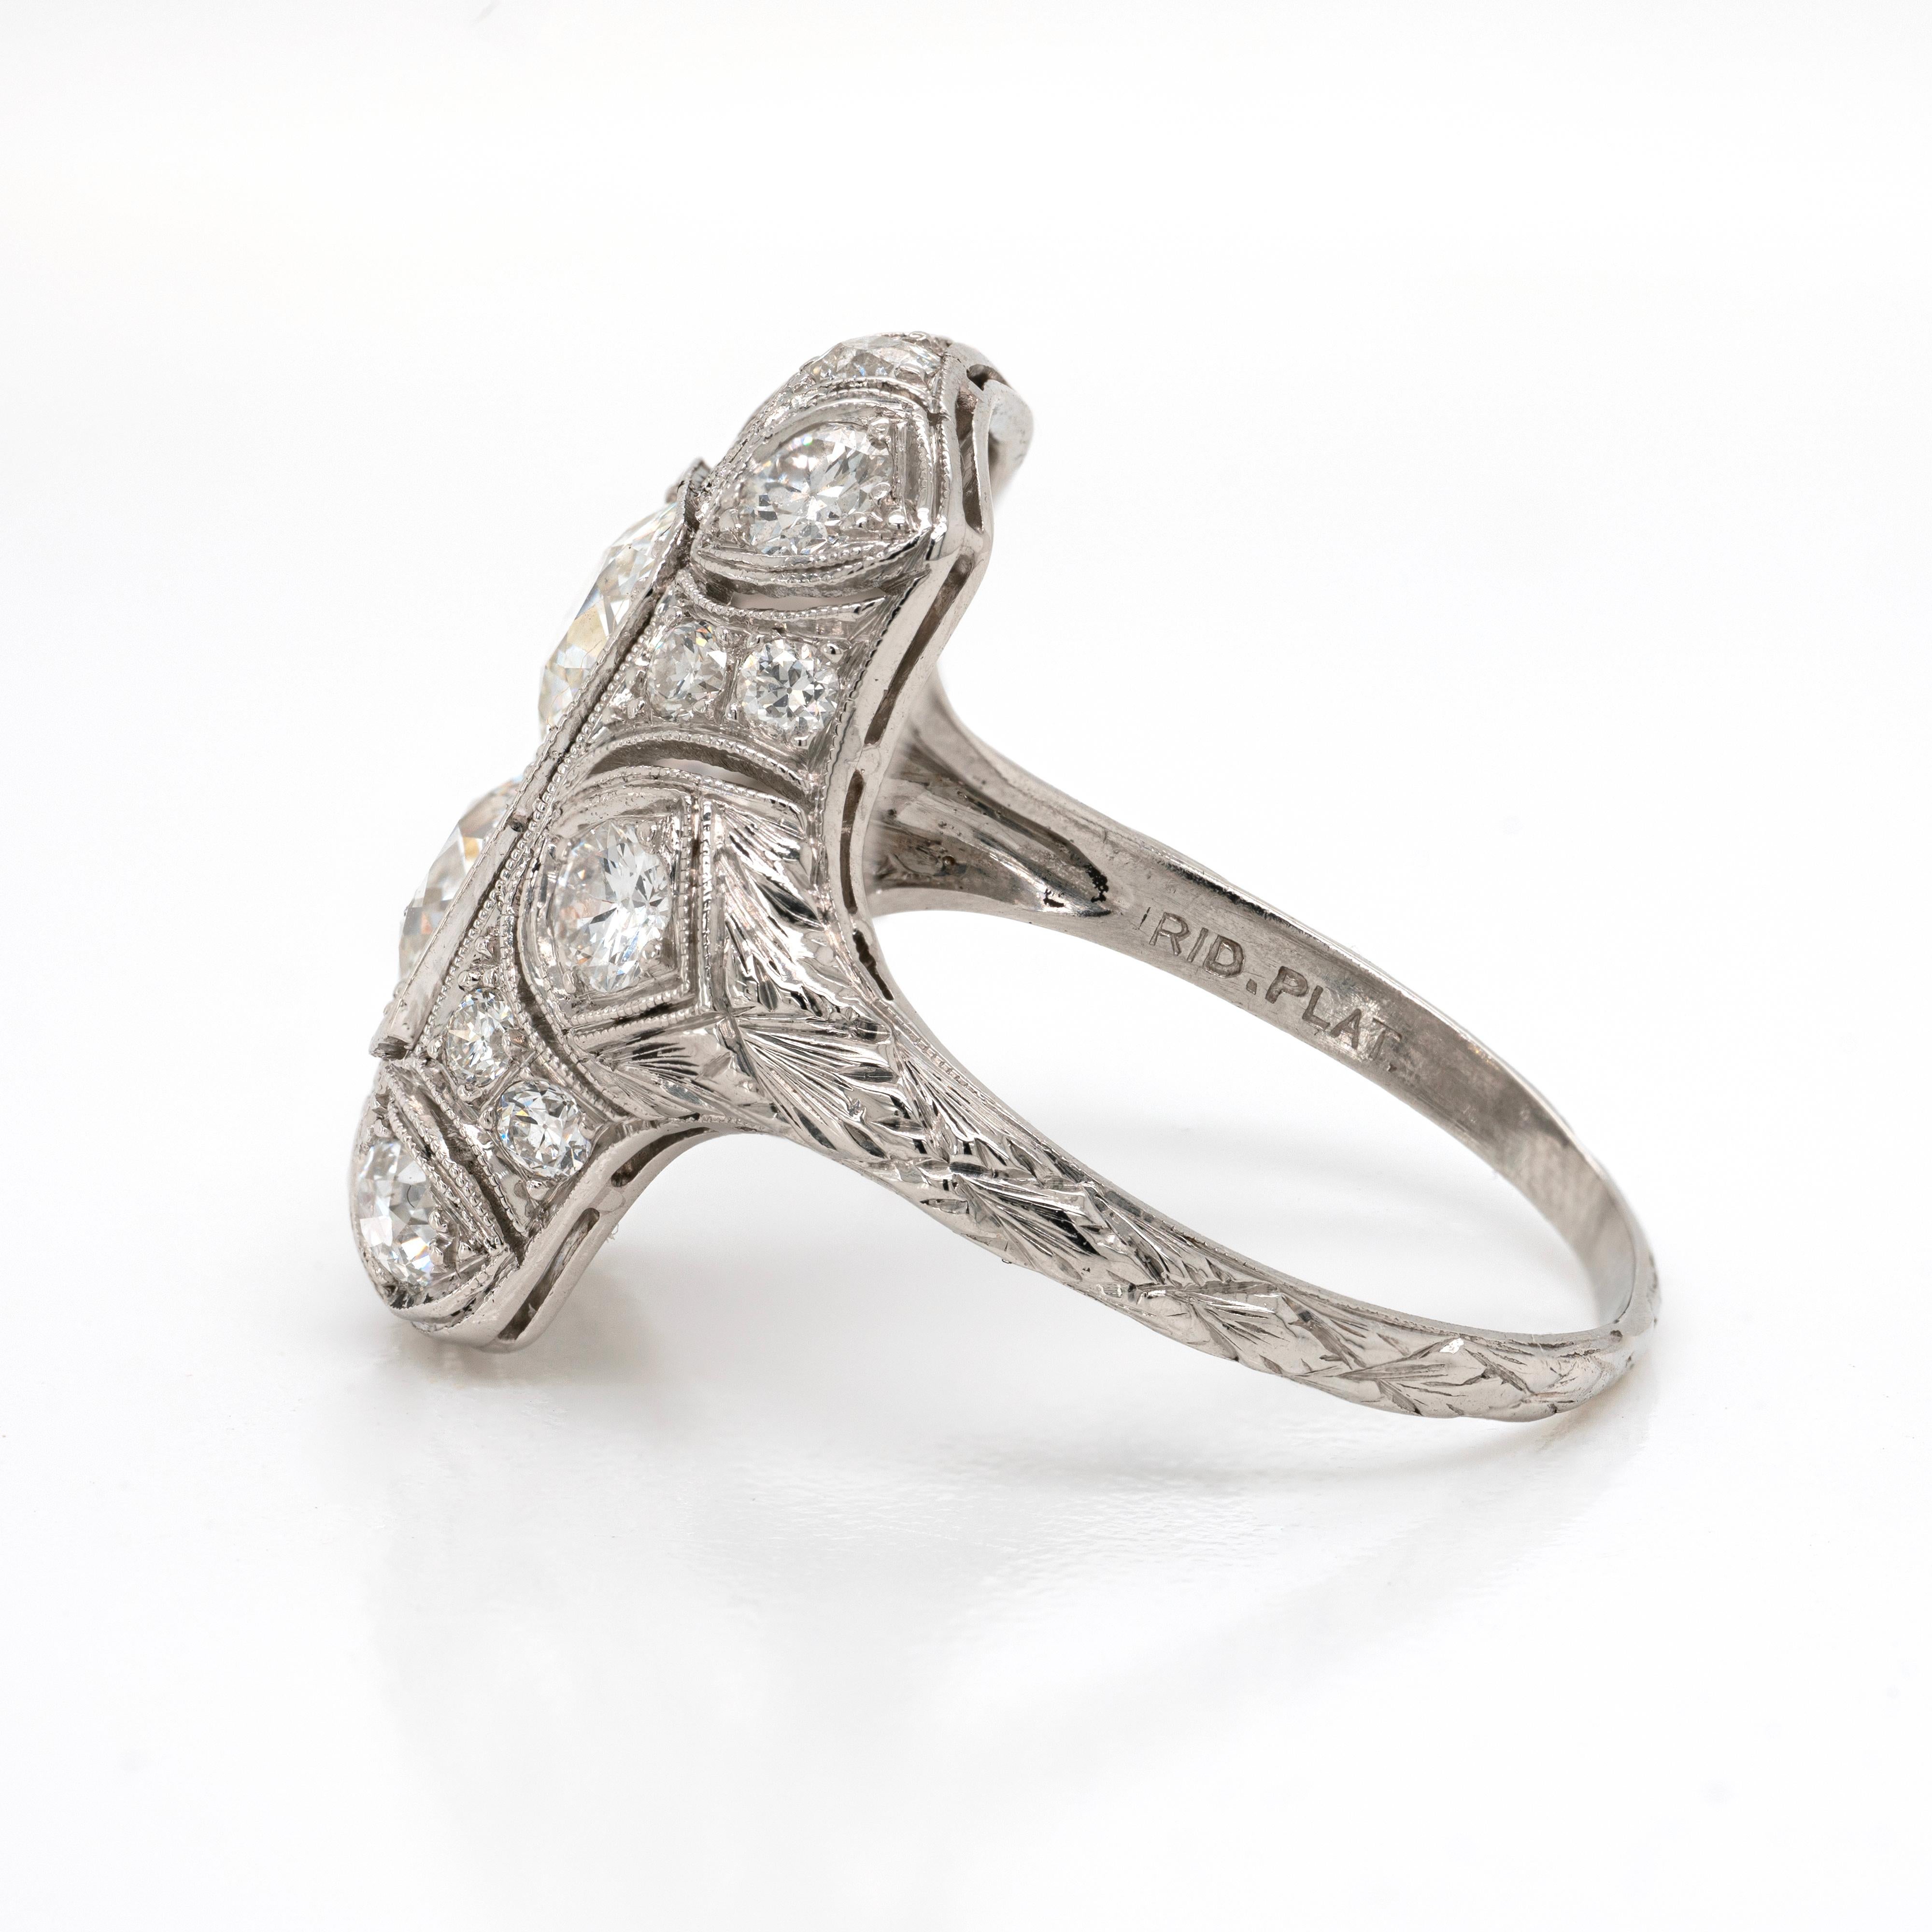 This antique platinum dress ring is typical of the Art Deco period with its spectacular design. The ring features centrally two old mine cut diamonds in a rectangular, open back, milgrain edged setting. The piece is further decorated with 16 old